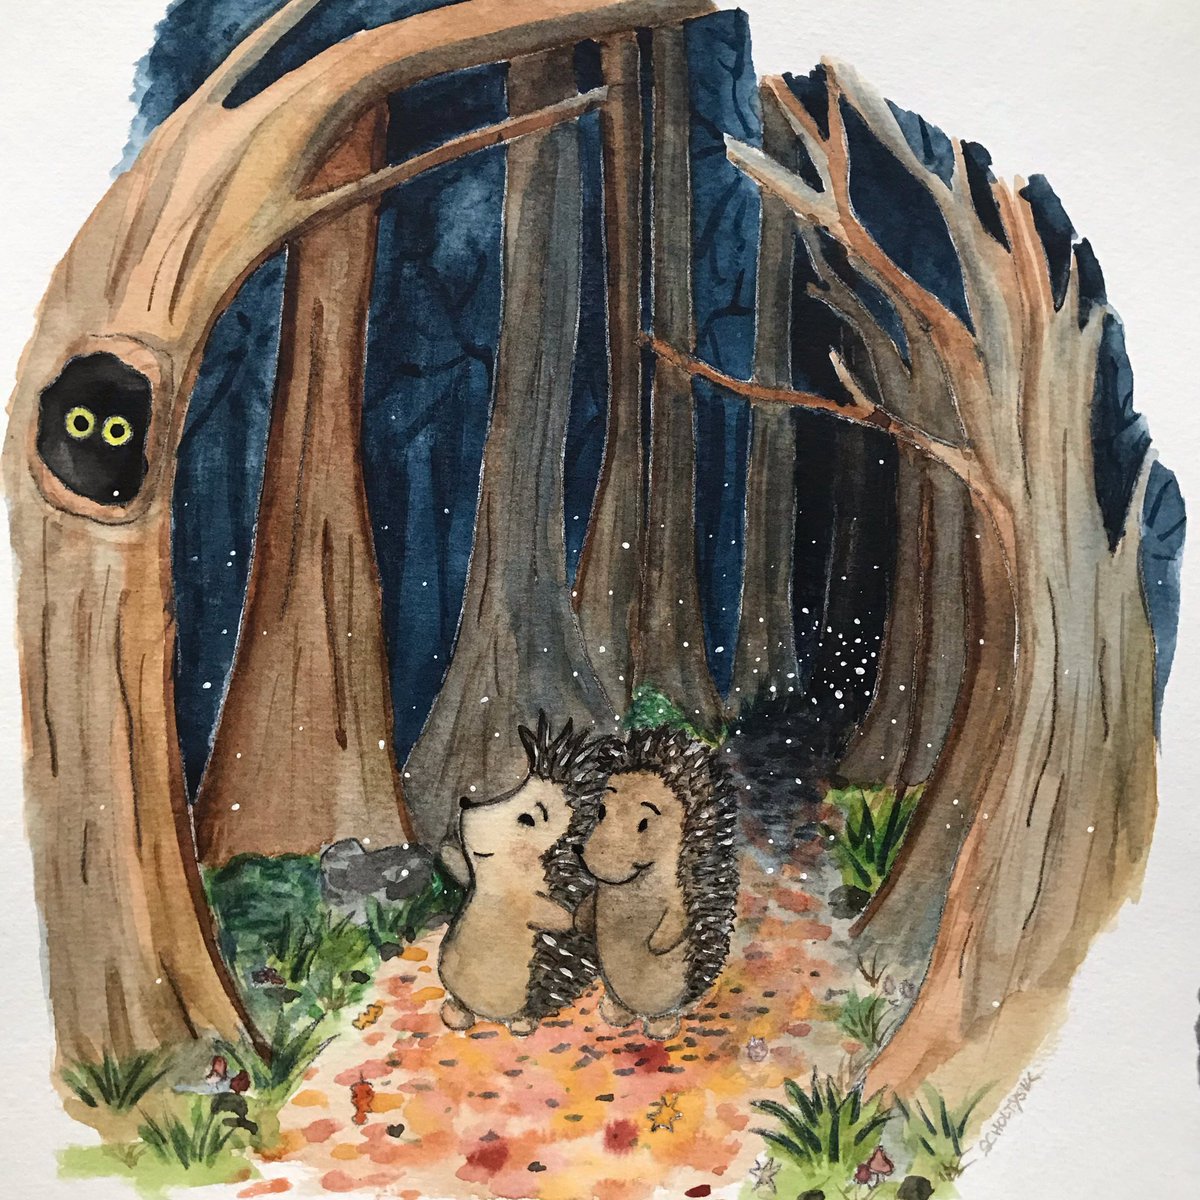 My colorful turn on a piece I did for #inktober last year 👩🏻‍🎨❤️

Eric & Pupus are a pretty prickly couple. They take a nice evening walk through the forest...

Watercolor & gouache on paper.
#femaleartist #womenwhodraw #scbwi #scbwiillustrator #watercolor